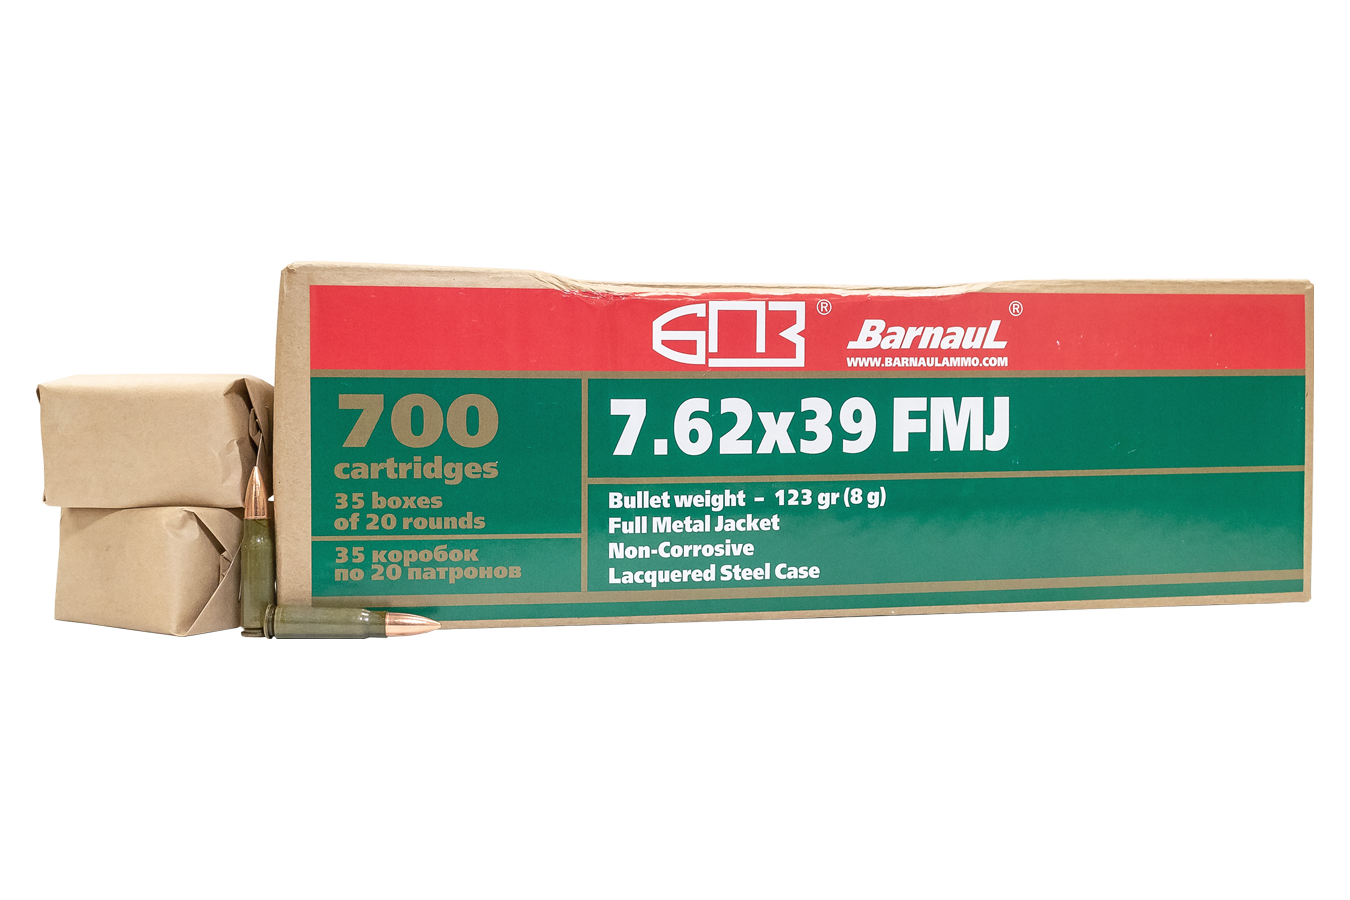 BARNAUL 7.62X39 123 GR FMJ STEEL CASE AMMO 700 ROUNDS IN METAL SPAM CAN